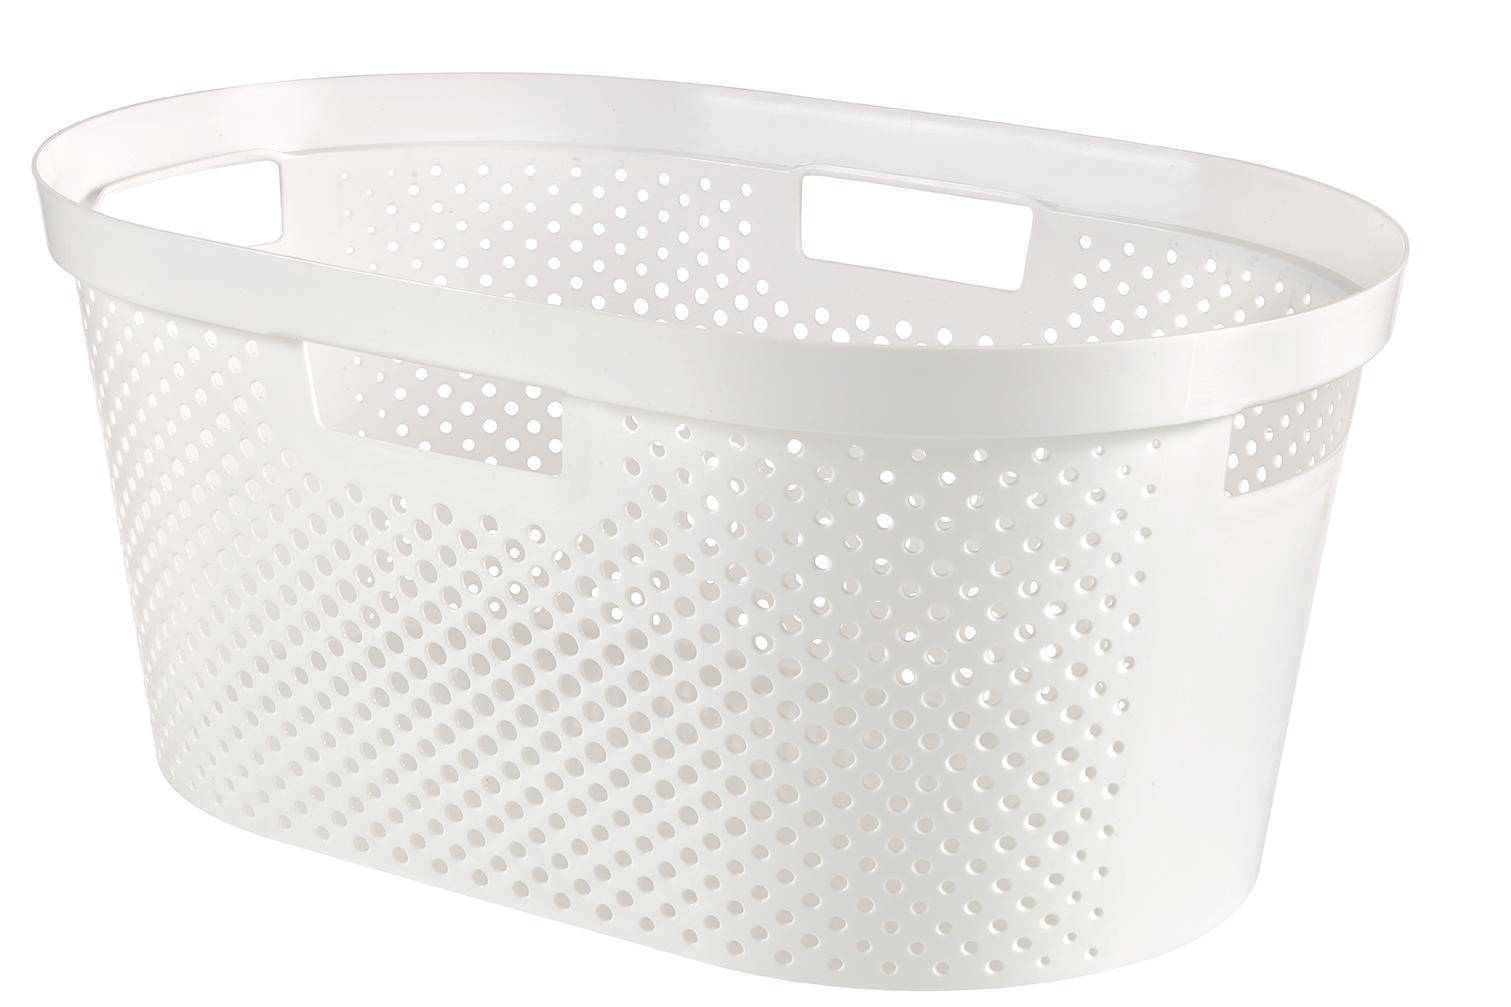 Curver Infinity Dots Wasmand Recycled 40 Liter Wit 59x39x26cm online kopen